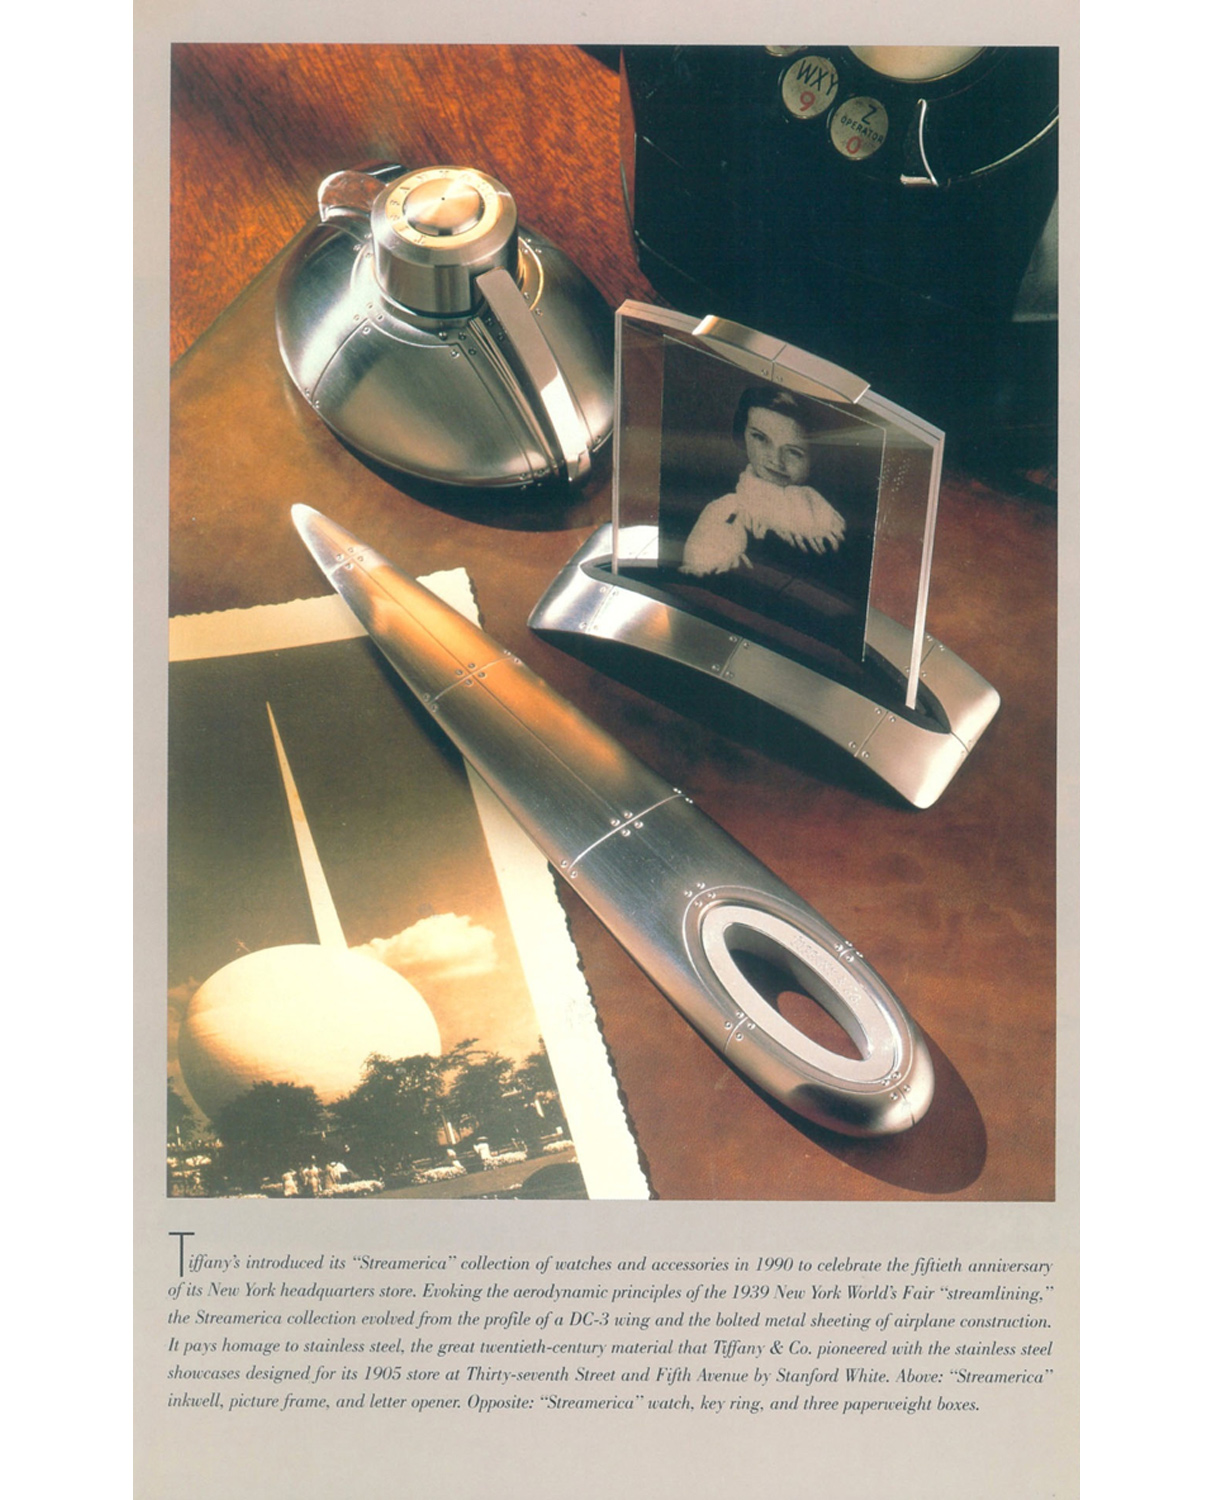 Loring’s 1997 Book: Tiffany's 20th Century: A Portrait of American Style. Airframe Small Picture Frame, Trylon Letter Opener, and Ink Bottle.